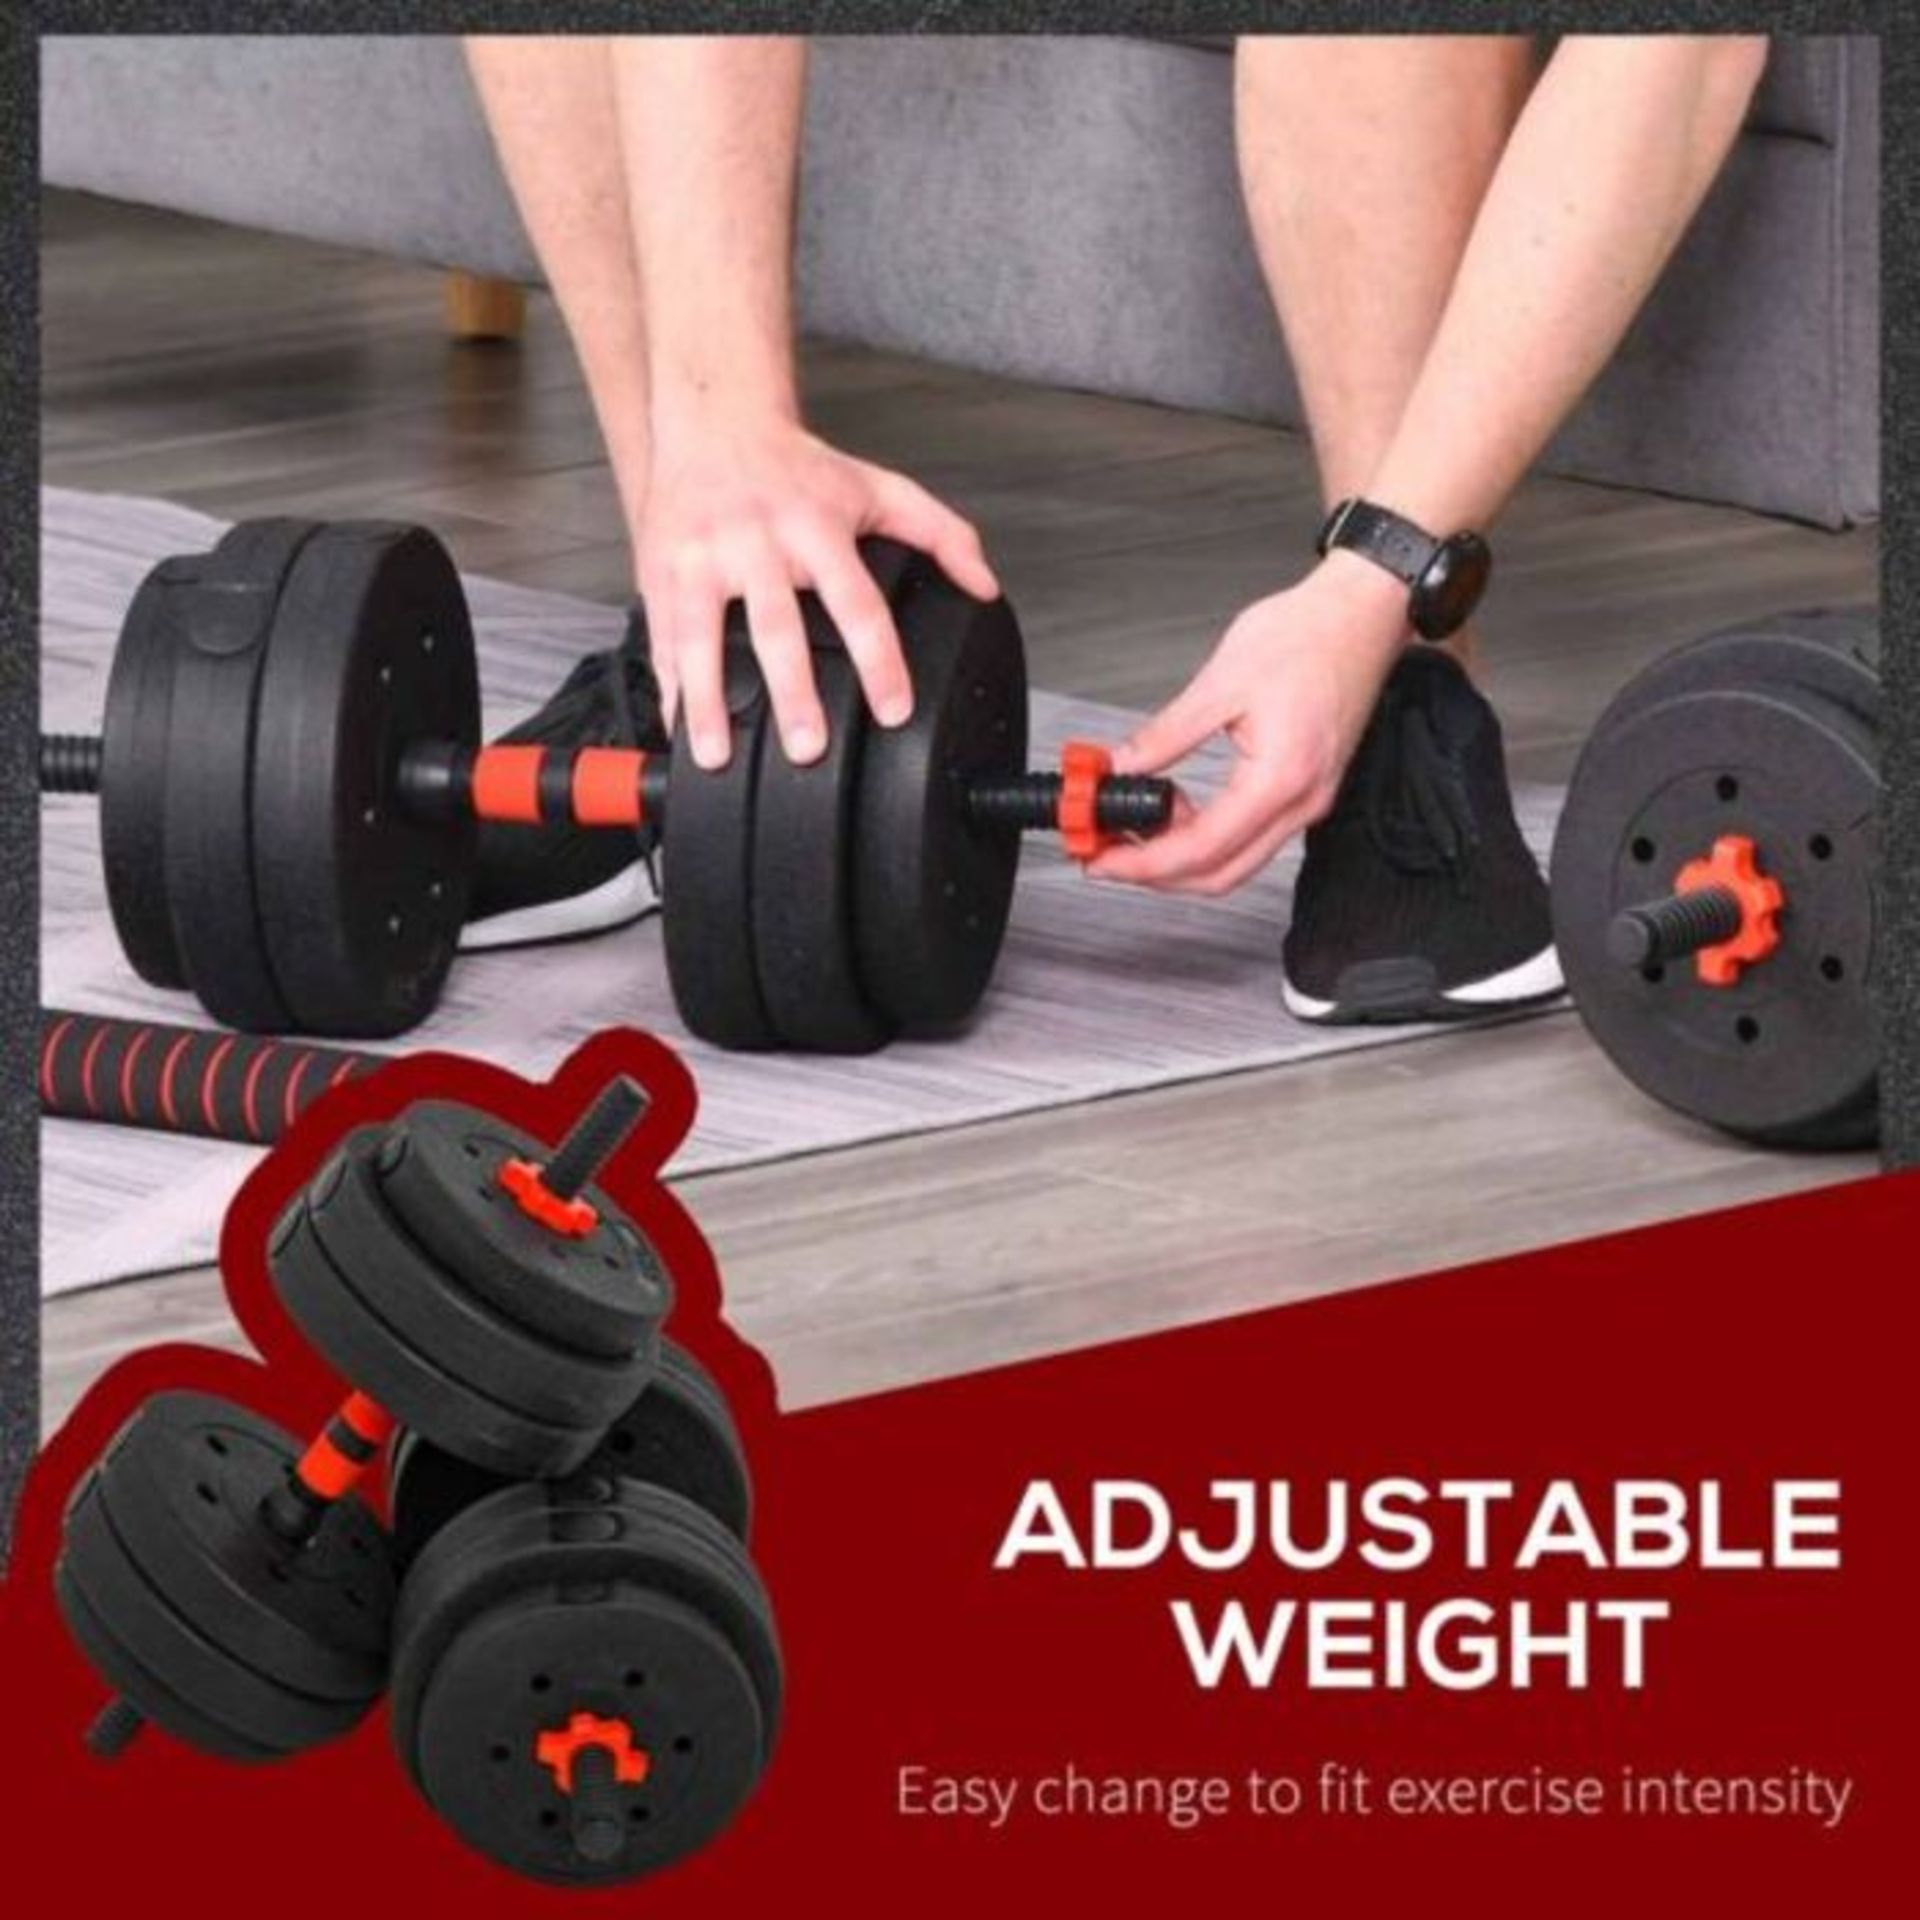 Hom Com 2 in1 Barbell/Dumb bell 30kg weight set, new and boxed, Similar sets retail at around ?50 - Image 3 of 4